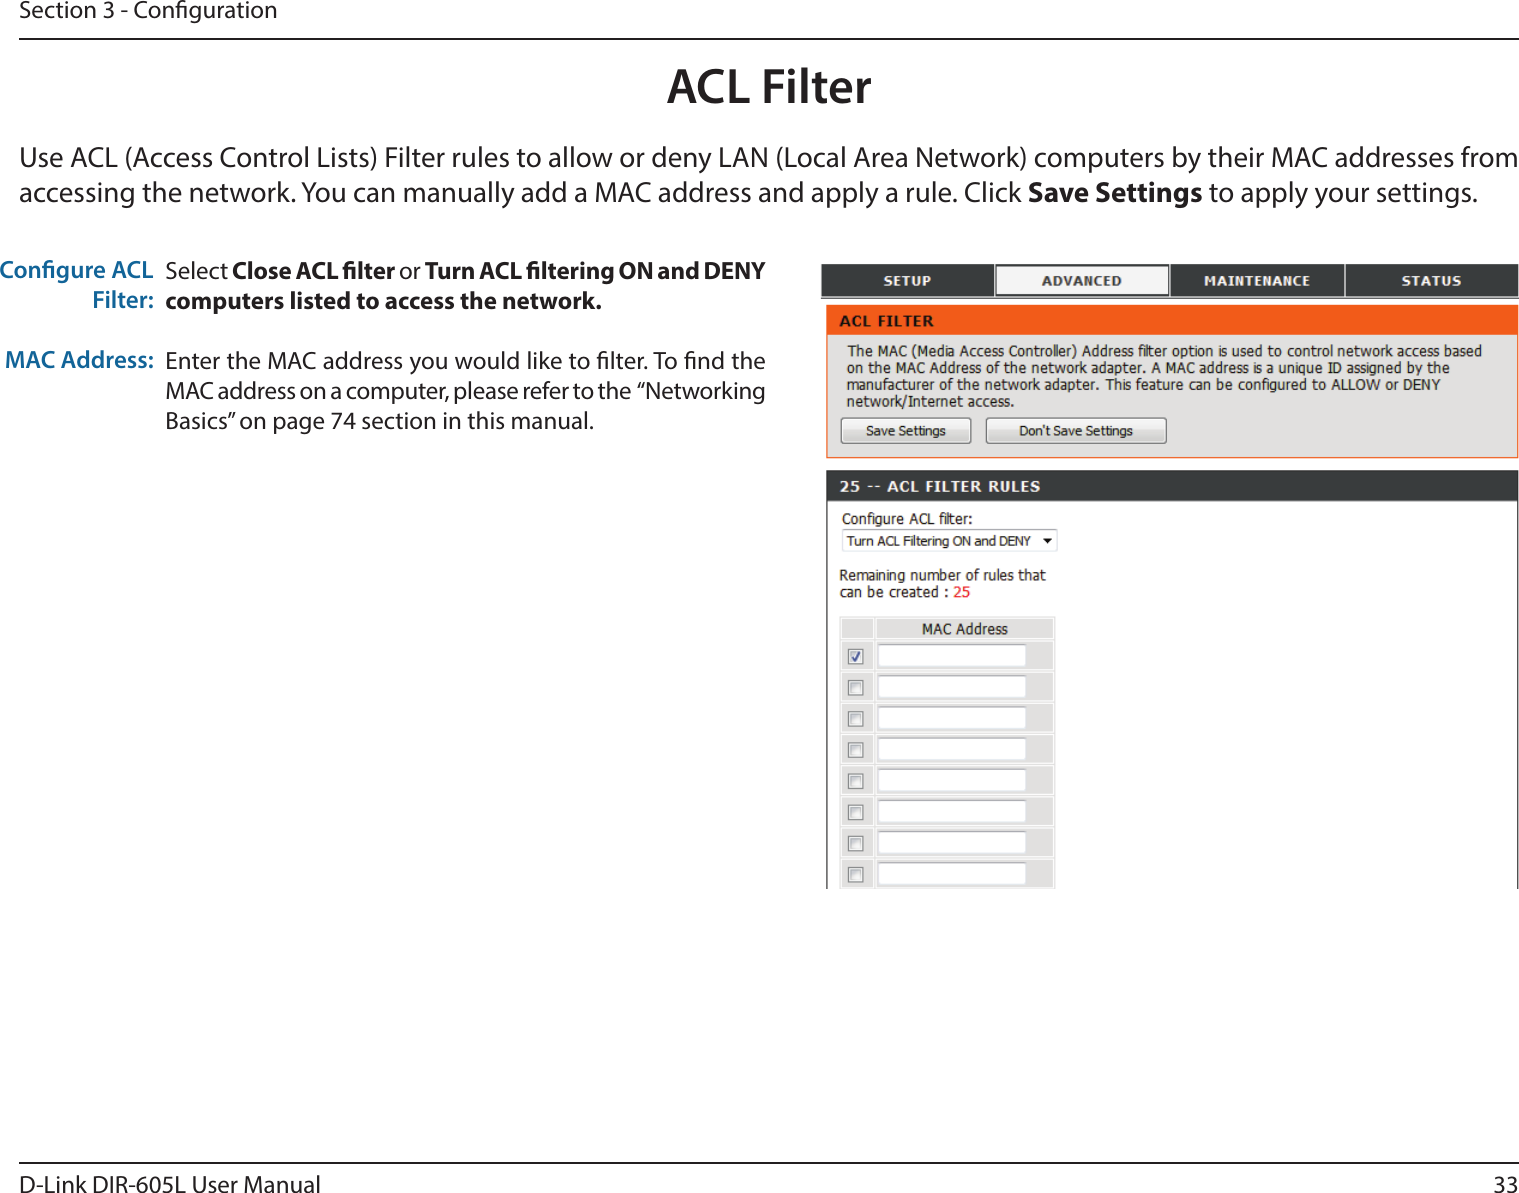 33D-Link DIR-605L User ManualSection 3 - CongurationACL FilterSelect Close ACL lter or Turn ACL ltering ON and DENY computers listed to access the network.  Enter the MAC address you would like to lter. To nd the MAC address on a computer, please refer to the  “Networking Basics” on page 74 section in this manual.Congure ACL Filter:MAC Address: Use ACL (Access Control Lists) Filter rules to allow or deny LAN (Local Area Network) computers by their MAC addresses from accessing the network. You can manually add a MAC address and apply a rule. Click Save Settings to apply your settings.